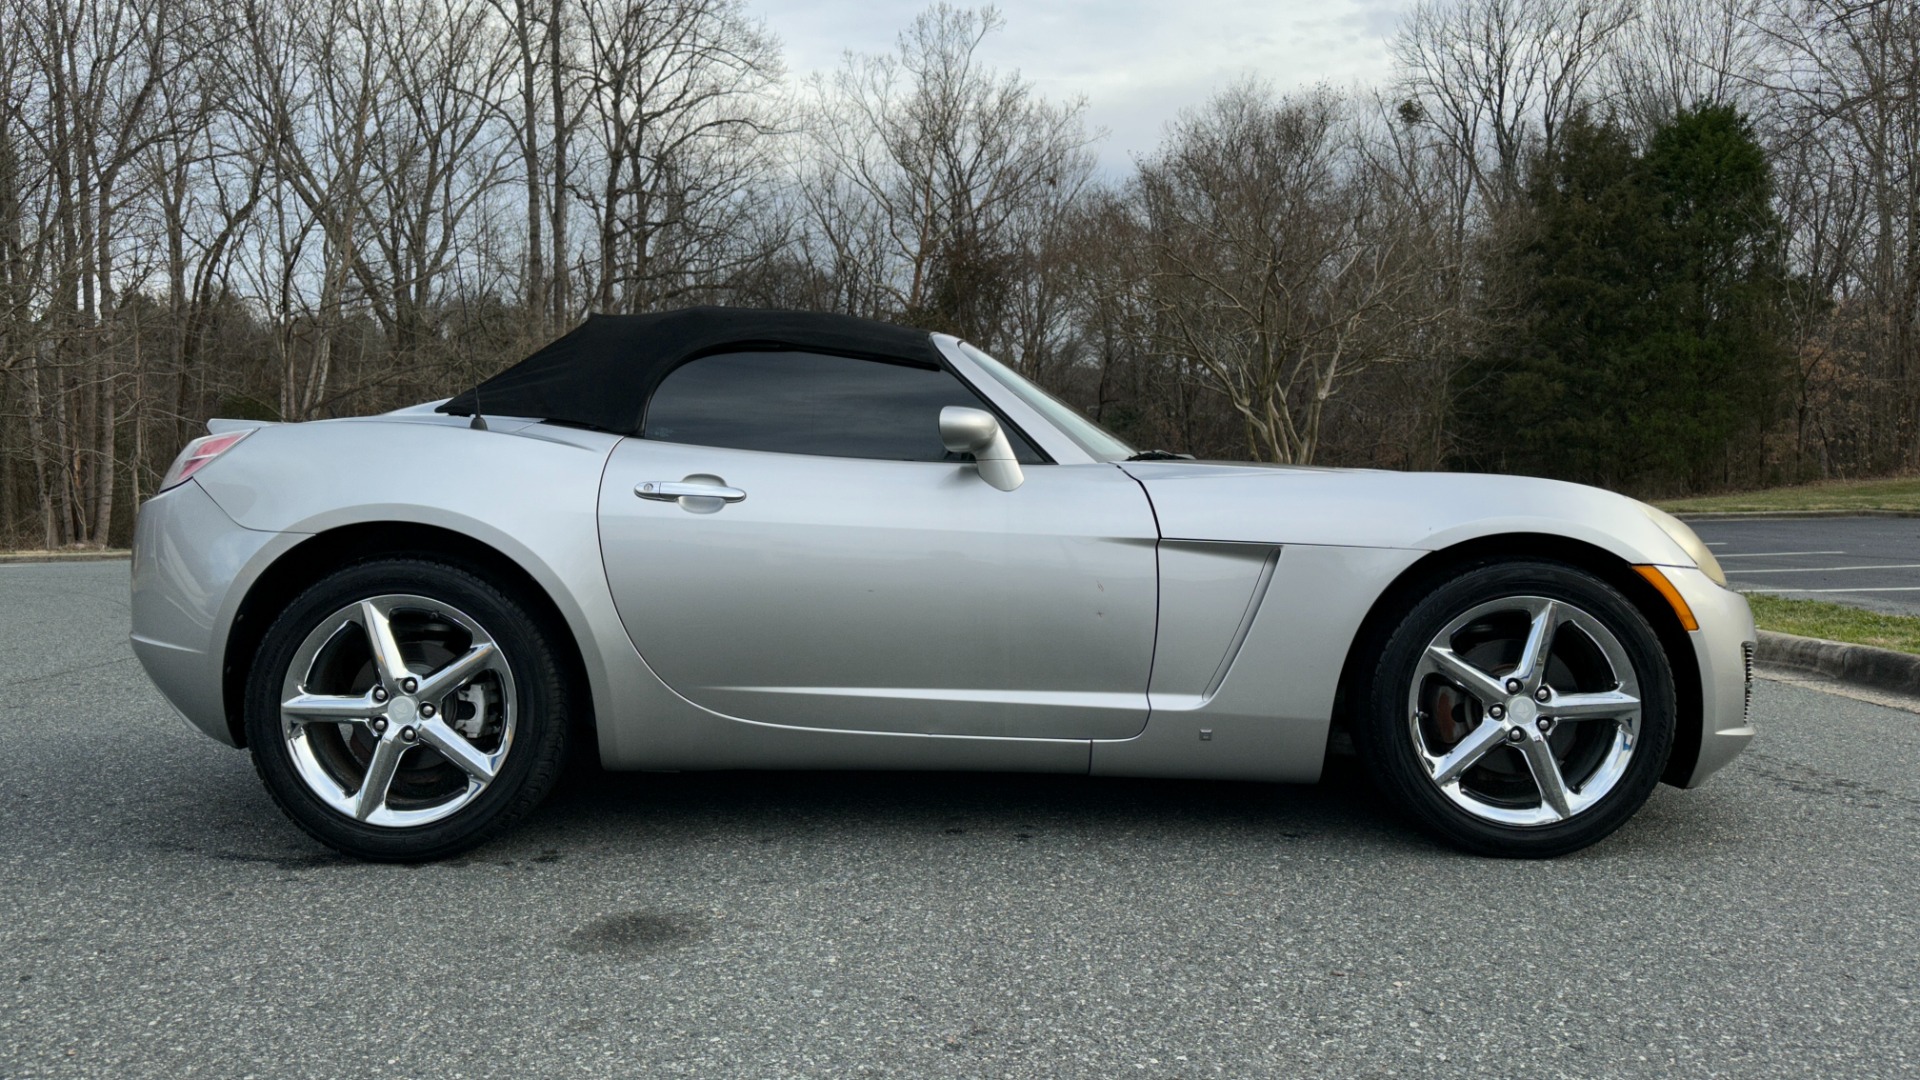 Used 2008 Saturn Sky CONVERTIBLE / MONSOON AUDIO / AUTOMATIC / PREMIUM TRIM / SPOILER for sale $10,995 at Formula Imports in Charlotte NC 28227 8